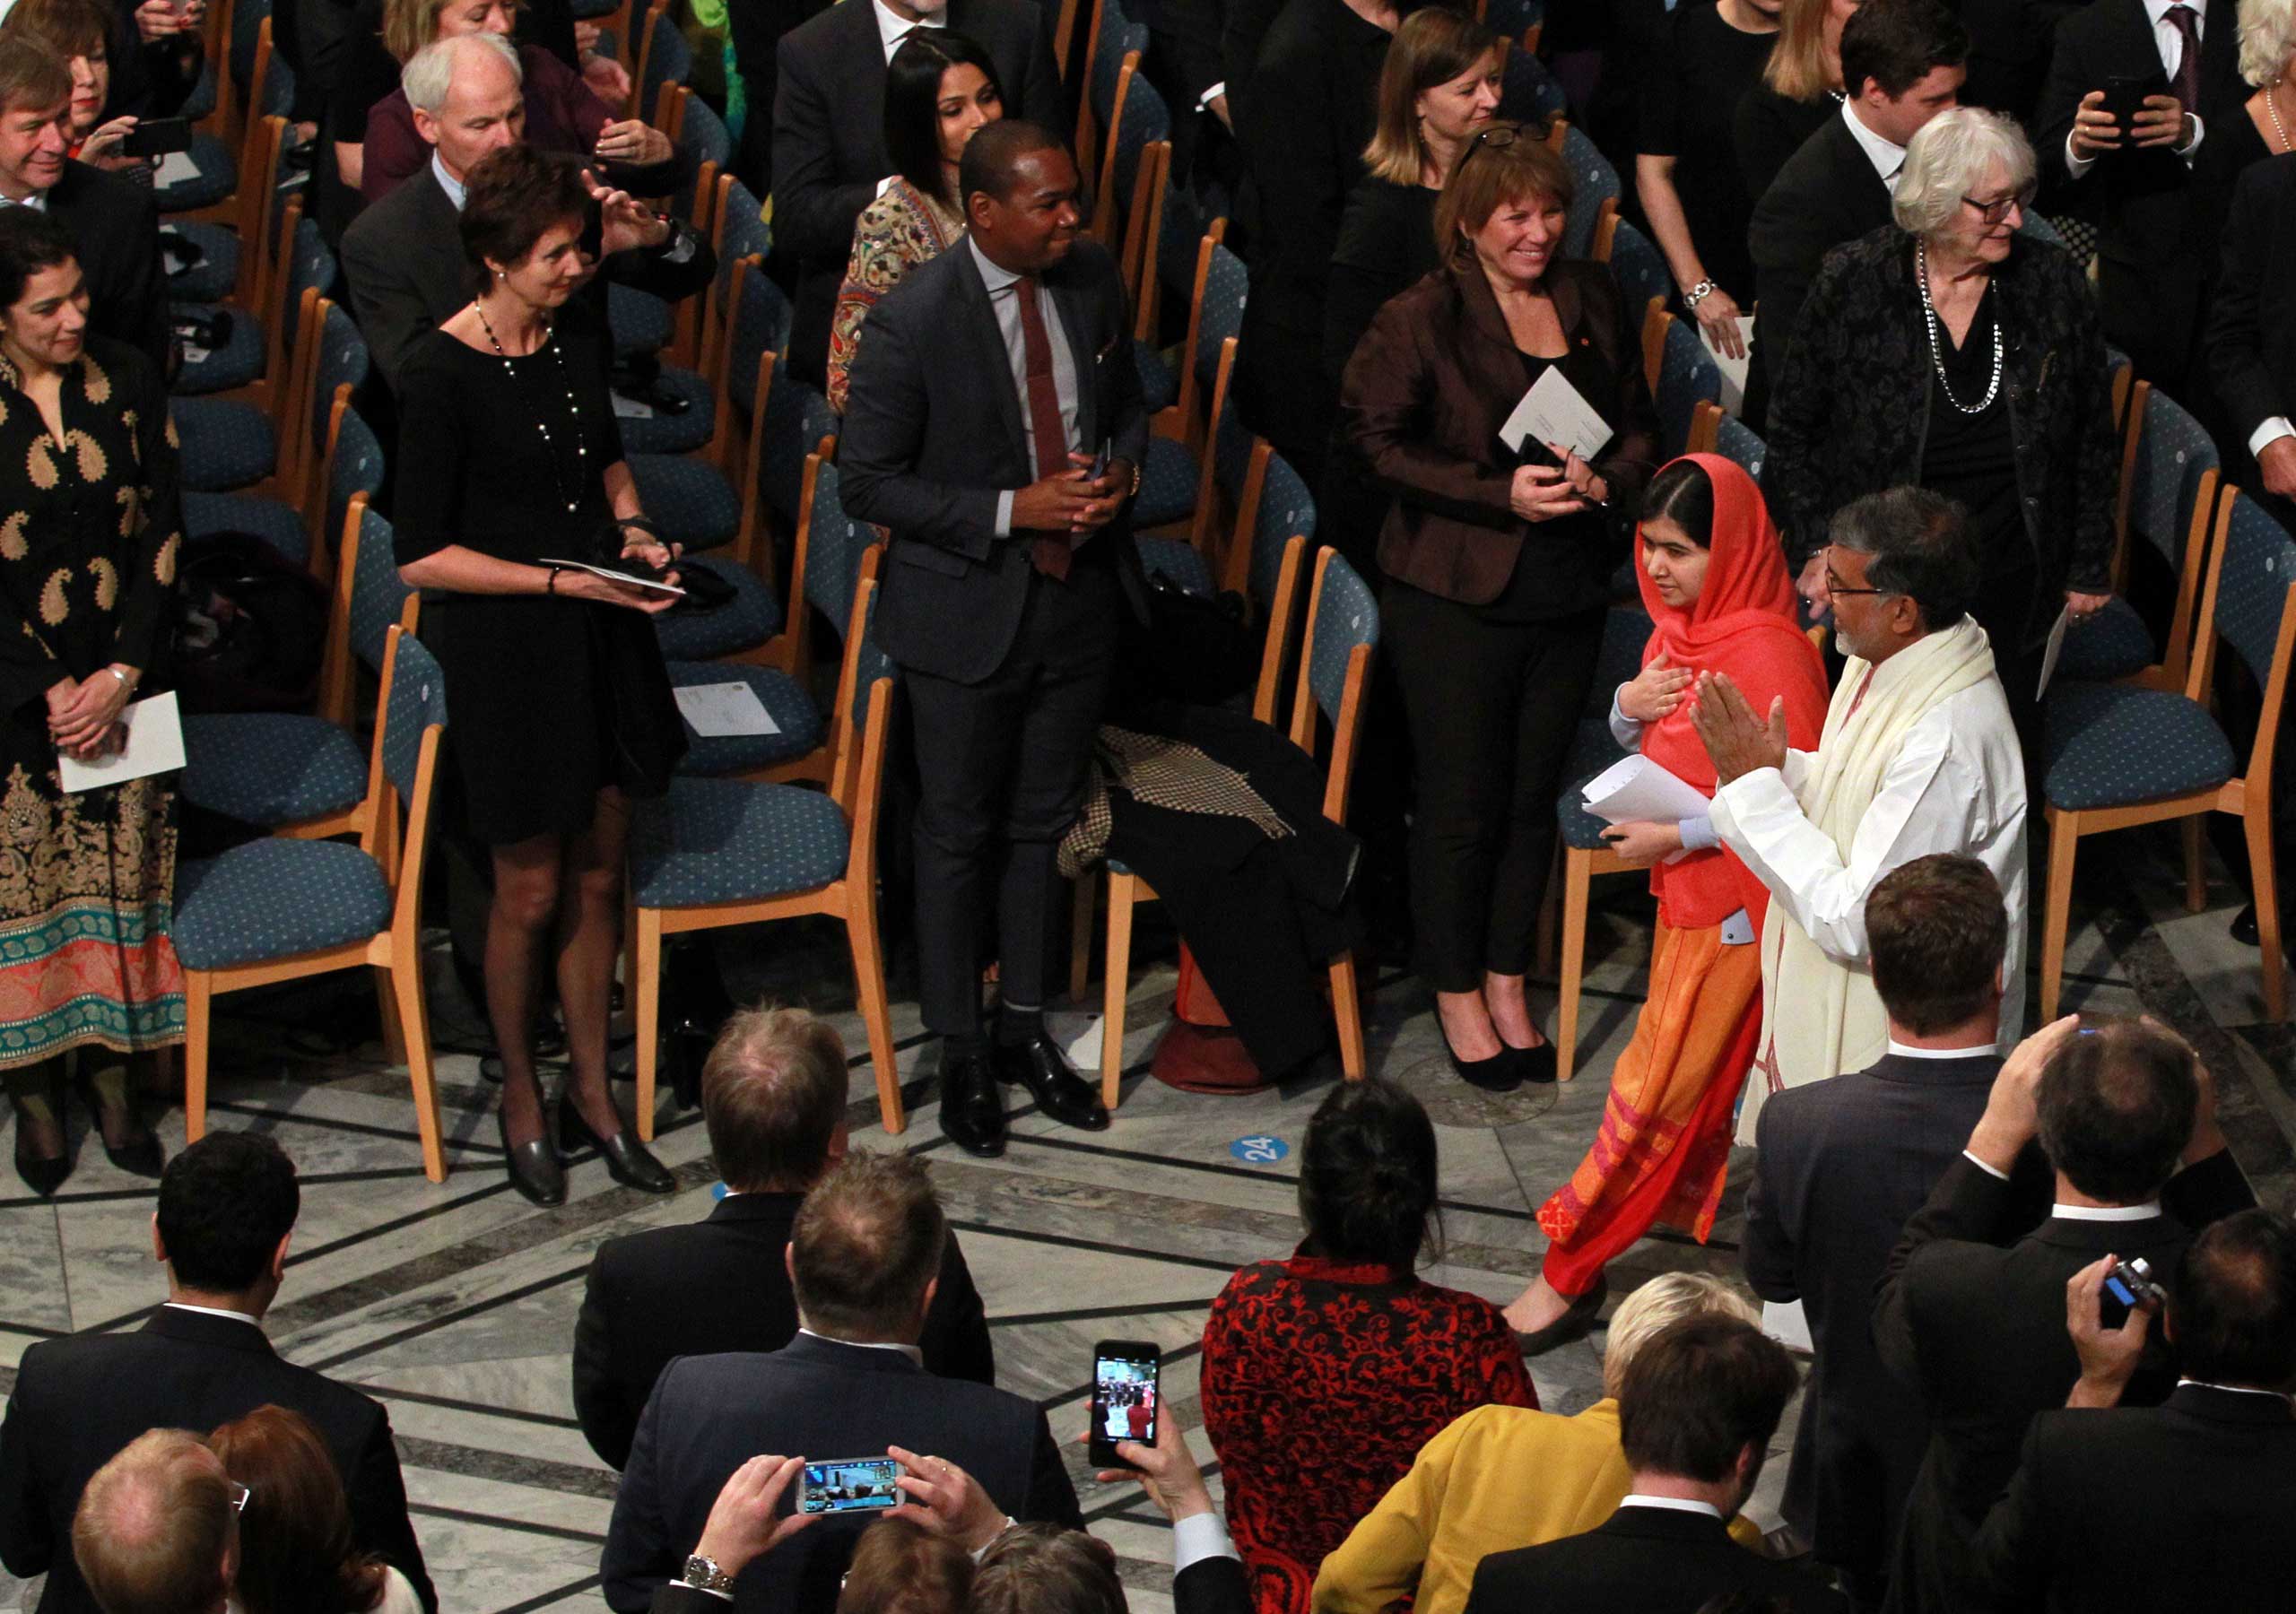 Dec. 10, 2014. Nobel Peace Prize laureates Malala Yousafzai, second right, and Kailash Satyarthi, right, arrive for the Nobel Peace Prize awards ceremony at the City Hall in Oslo. 17-year-old Malala shares the 2014 peace prize with the Indian campaigner Satyarthi, 60, who has fought for 35 years to free thousands of children from virtual slave labour.